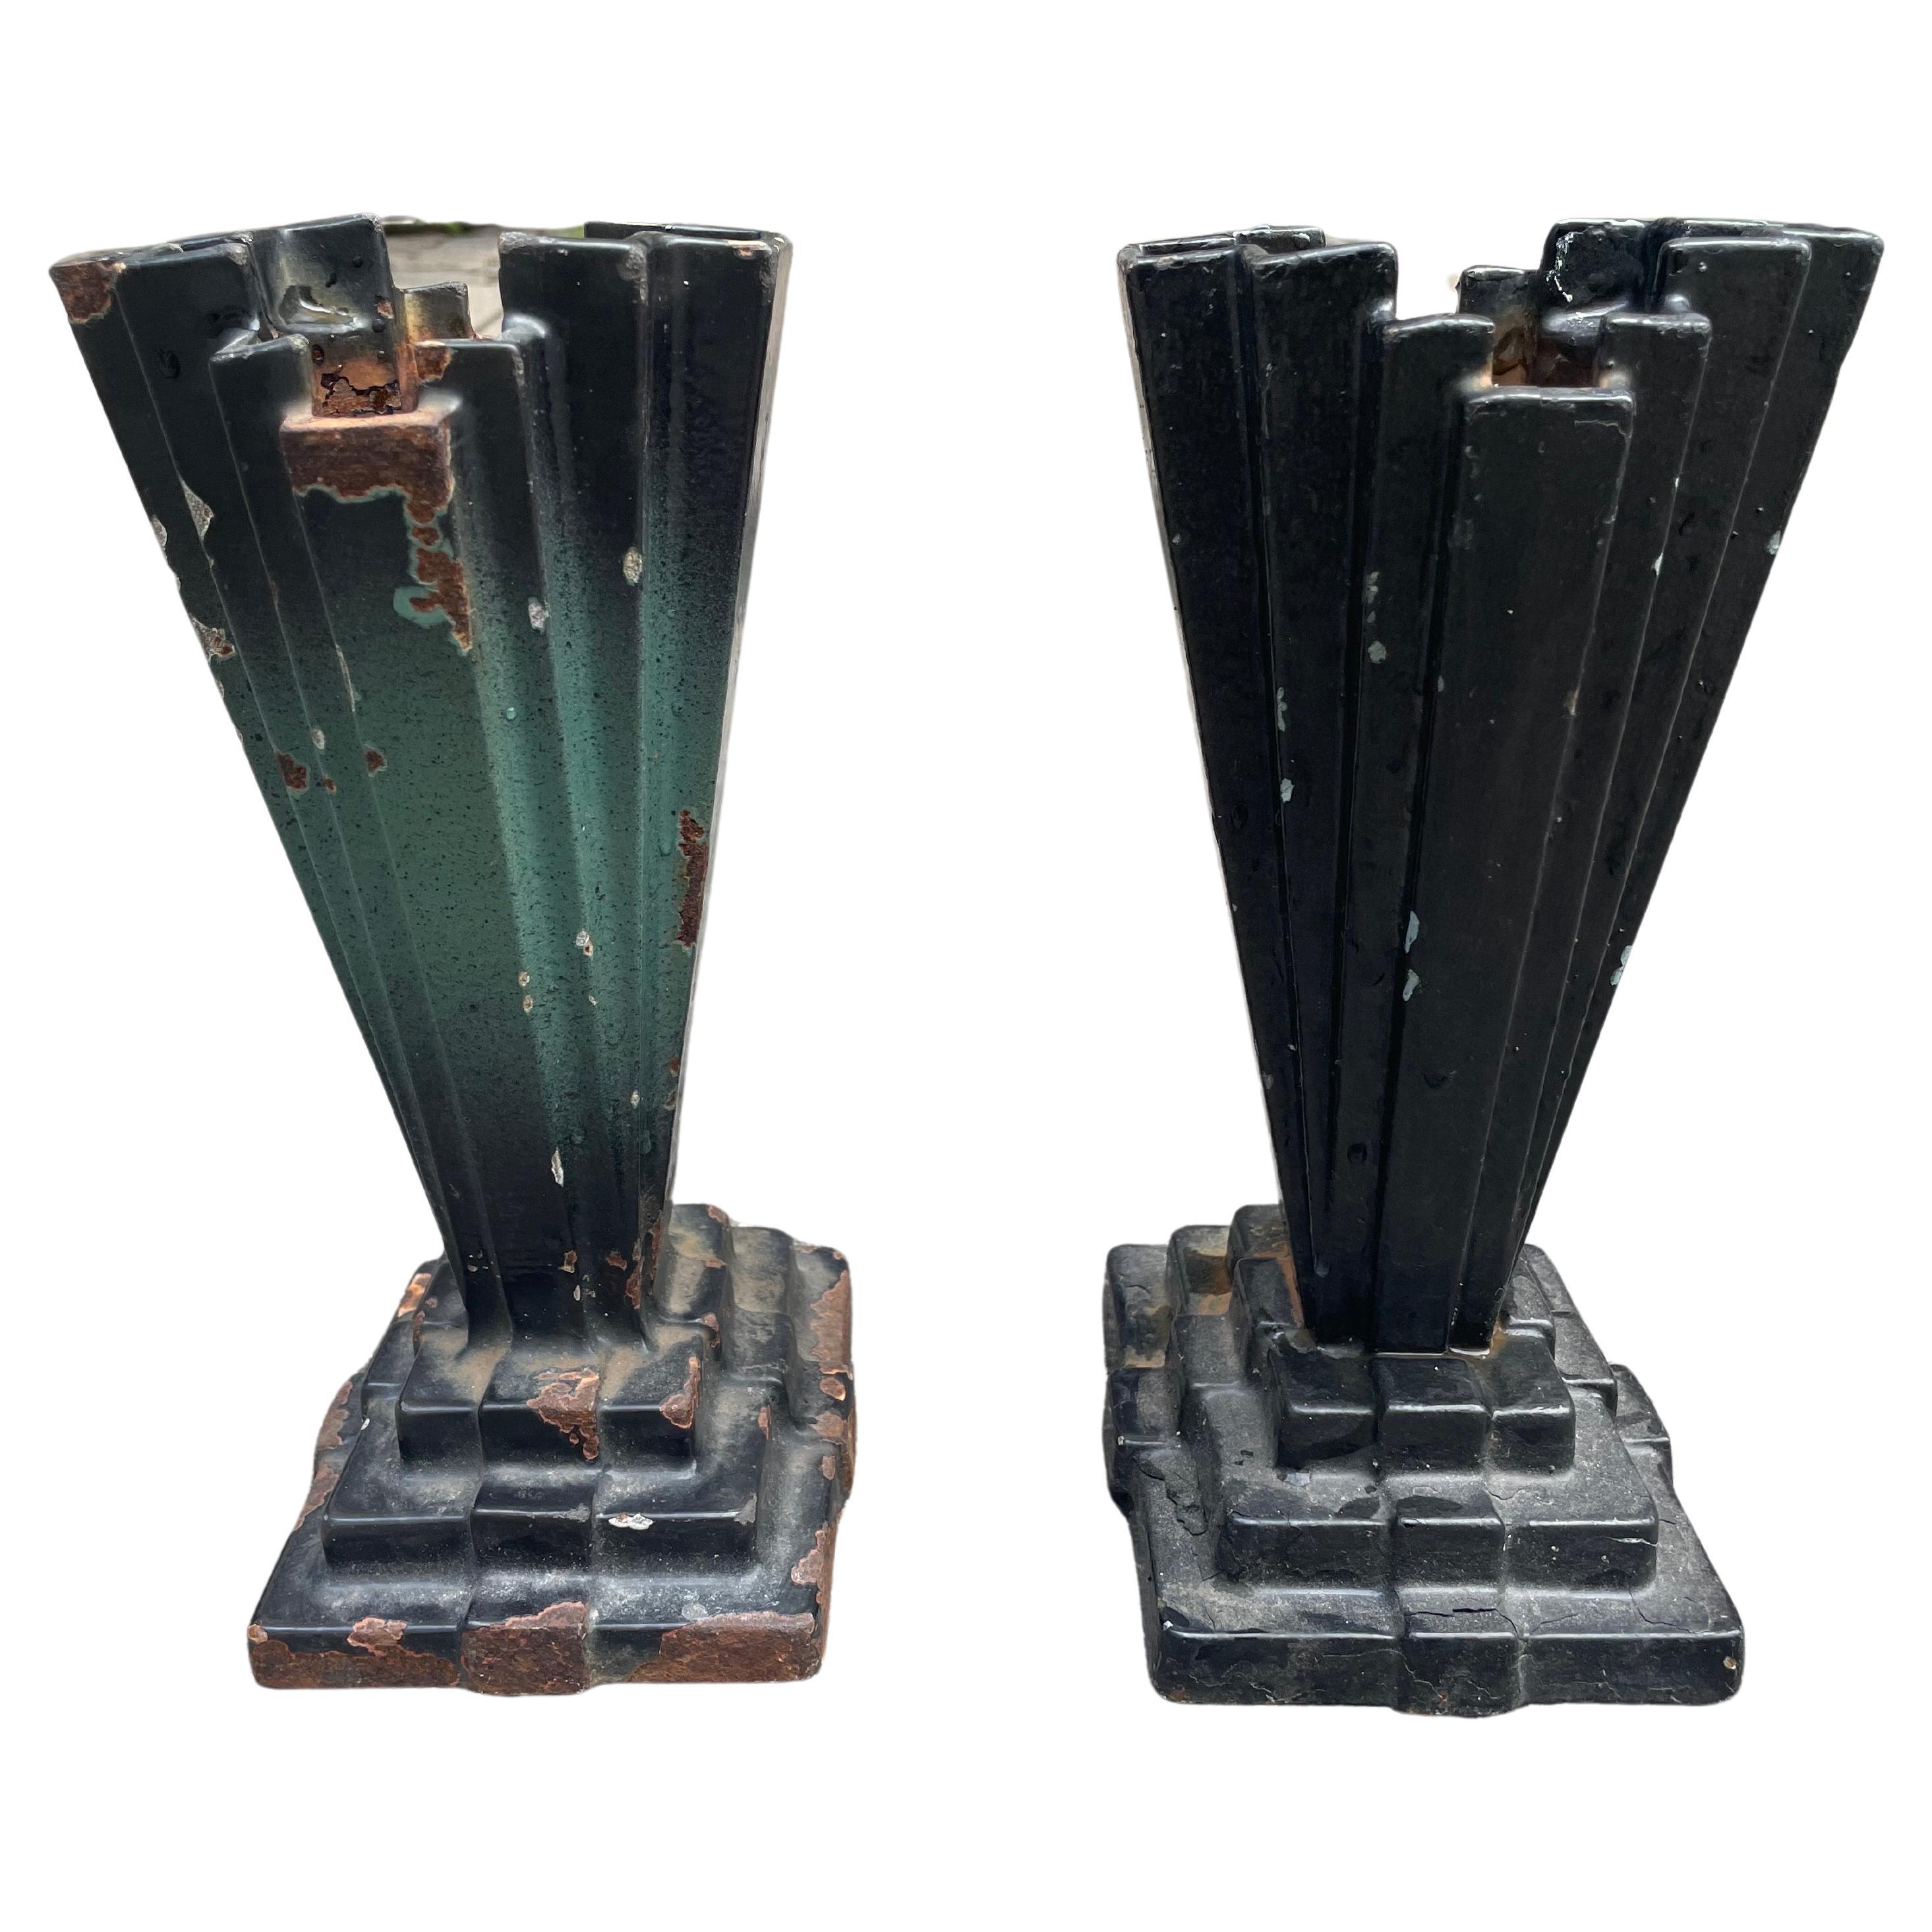 The timeless elegance of the 1920s with a remarkable pair of patinated cast iron Art Deco mortuary vases from the renowned Swedish company, Husqvarna. These exquisite vases exude both beauty and melancholy, capturing the essence of a bygone era with